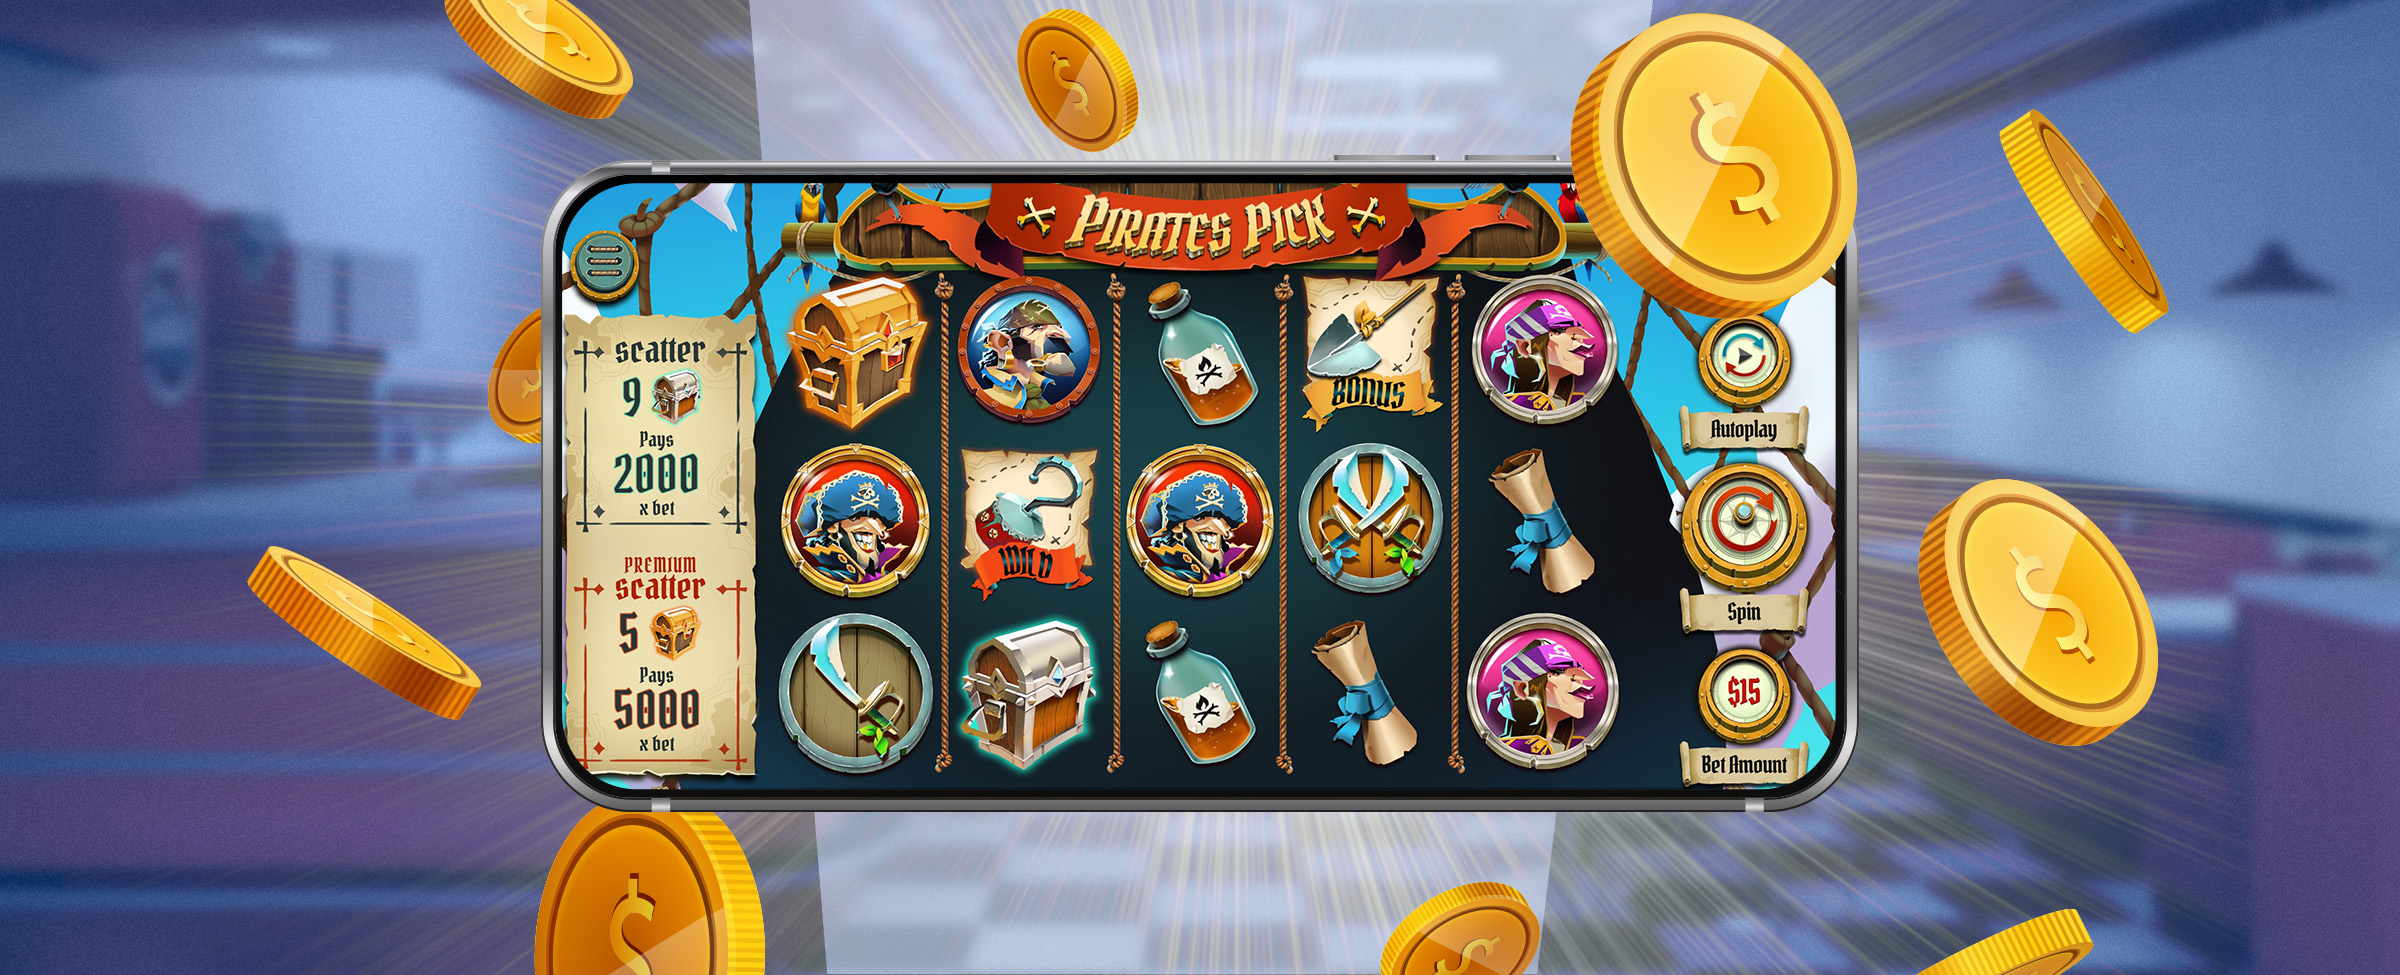 A mobile phone showing a screenshot of the Cafe Casino slot game Pirate’s Pick, against the background of an out-of-focus 50s American diner, and with gold coins falling around it.